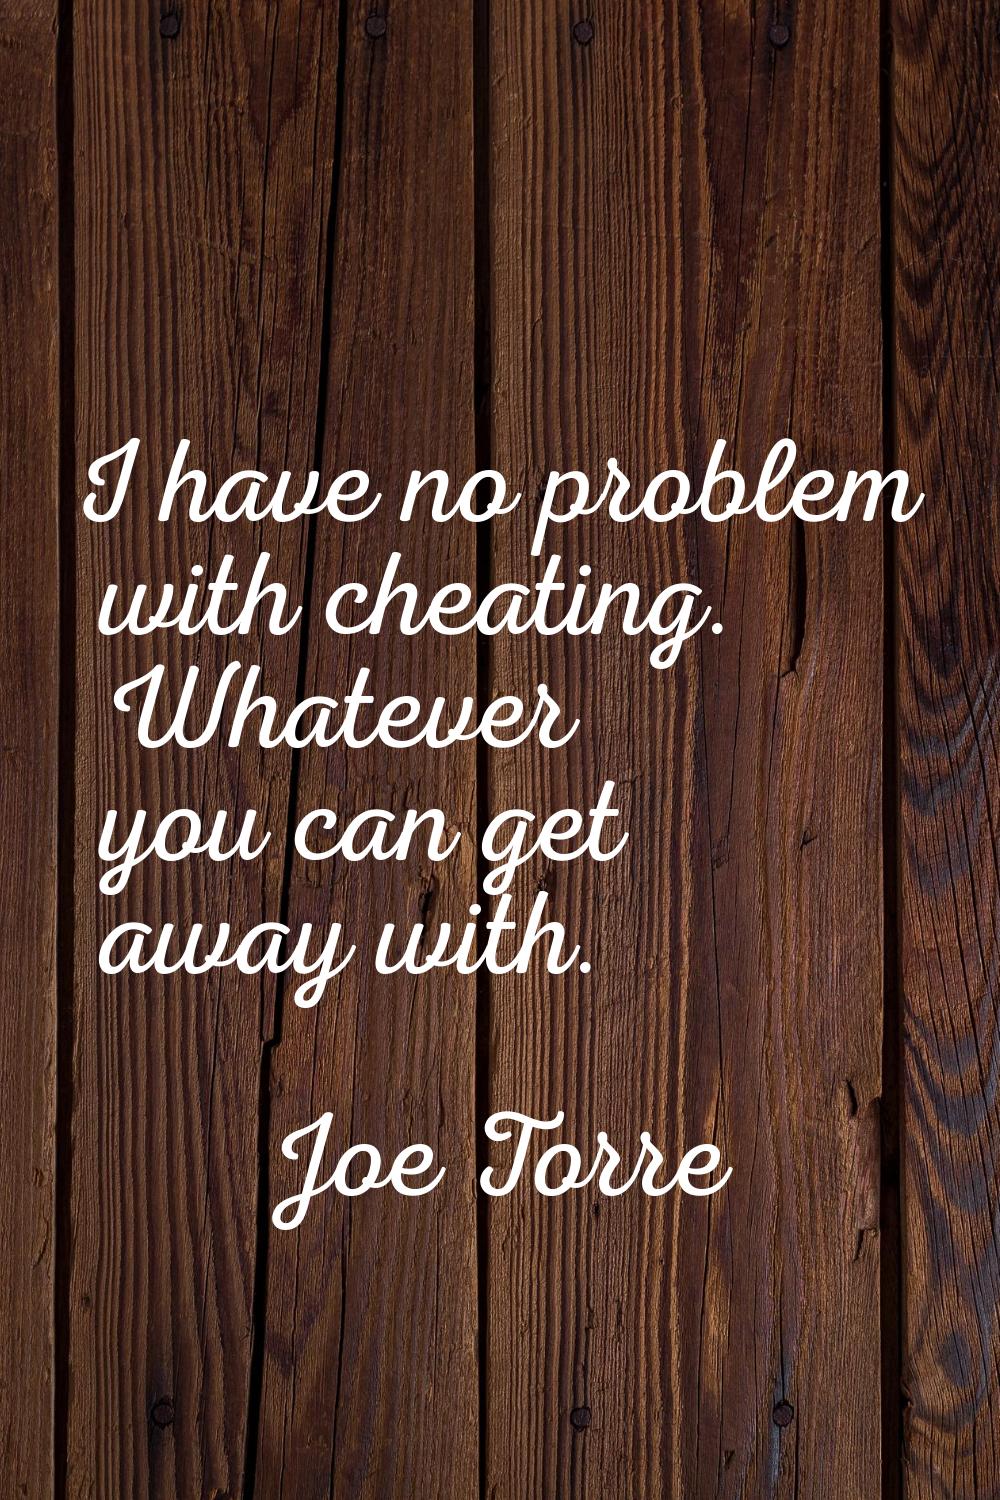 I have no problem with cheating. Whatever you can get away with.